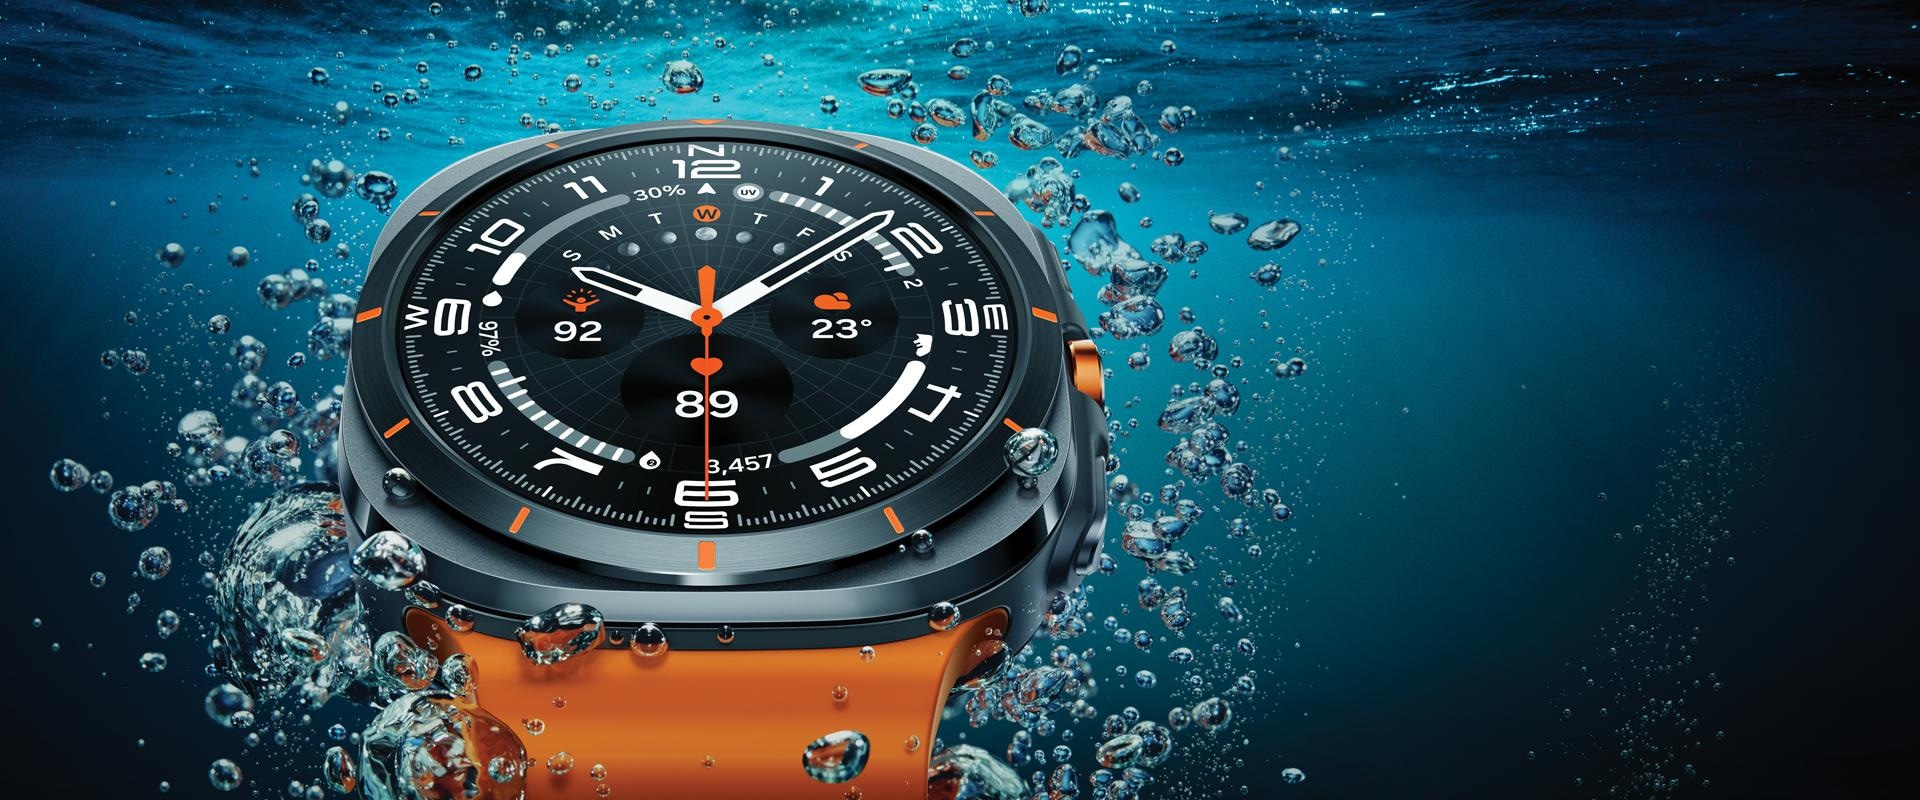 A Galaxy Watch Ultra is seen close-up in the water near the surface, showcasing its design.